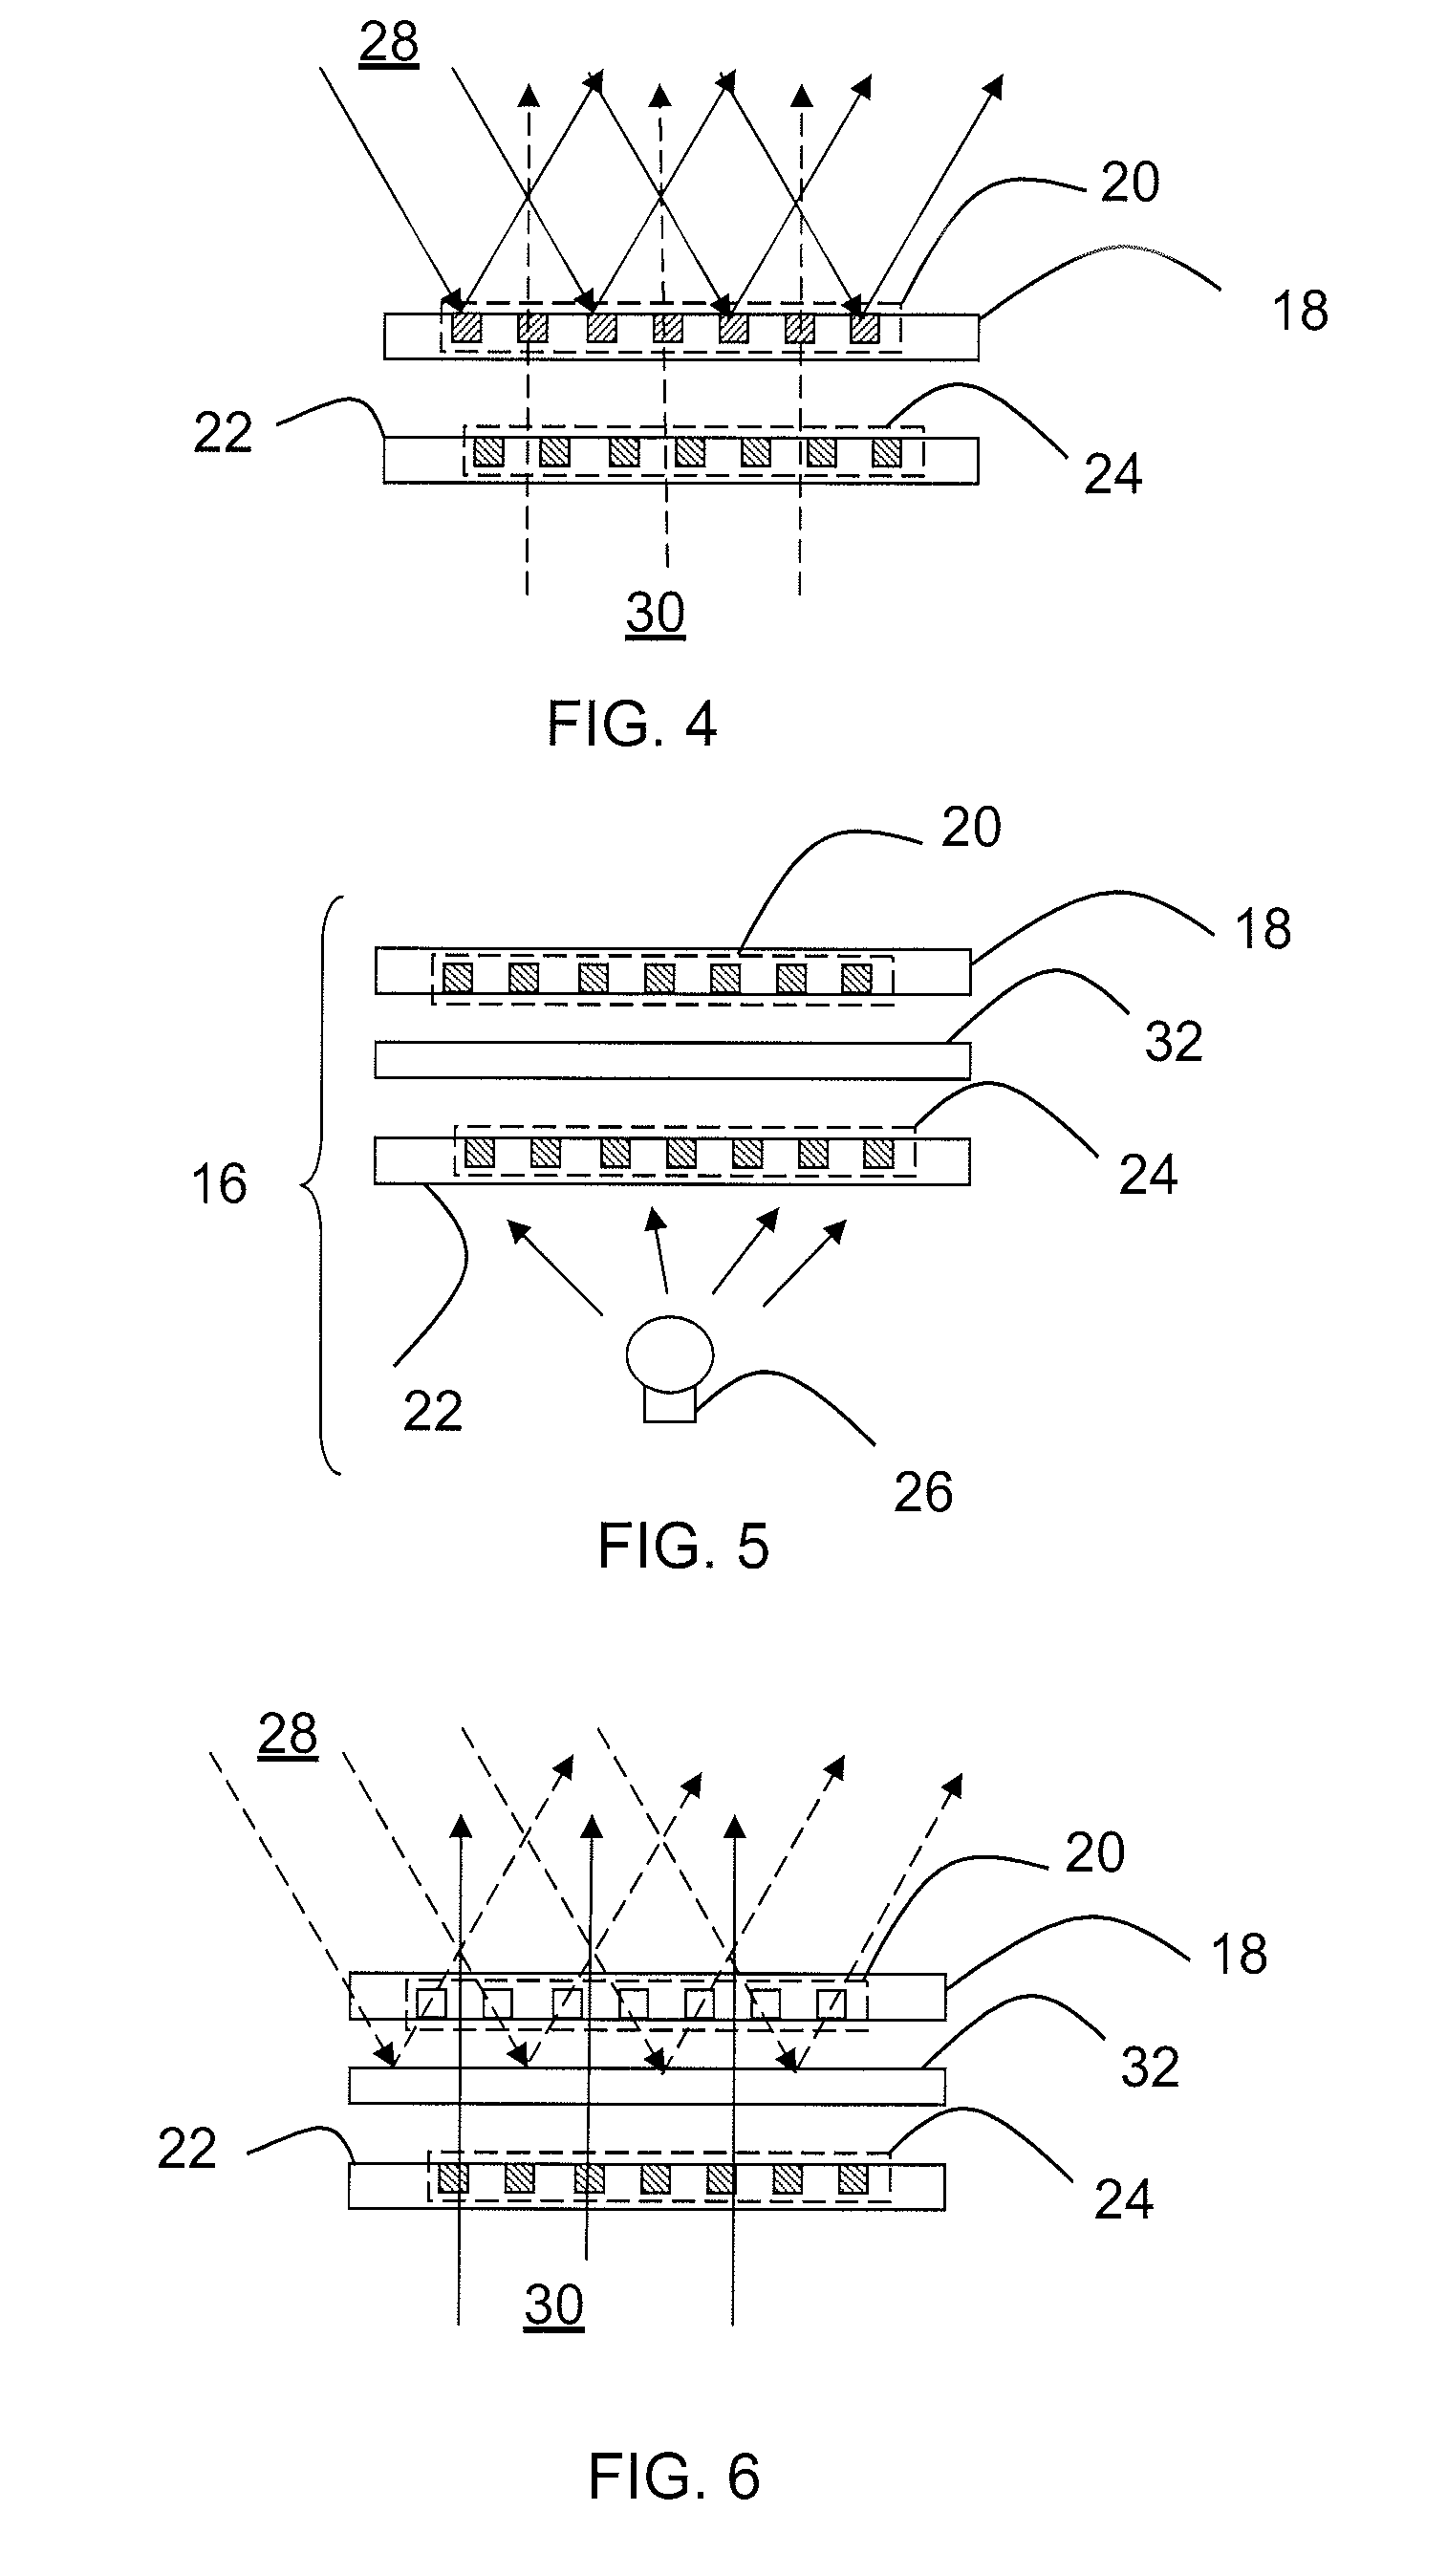 Information presenting device